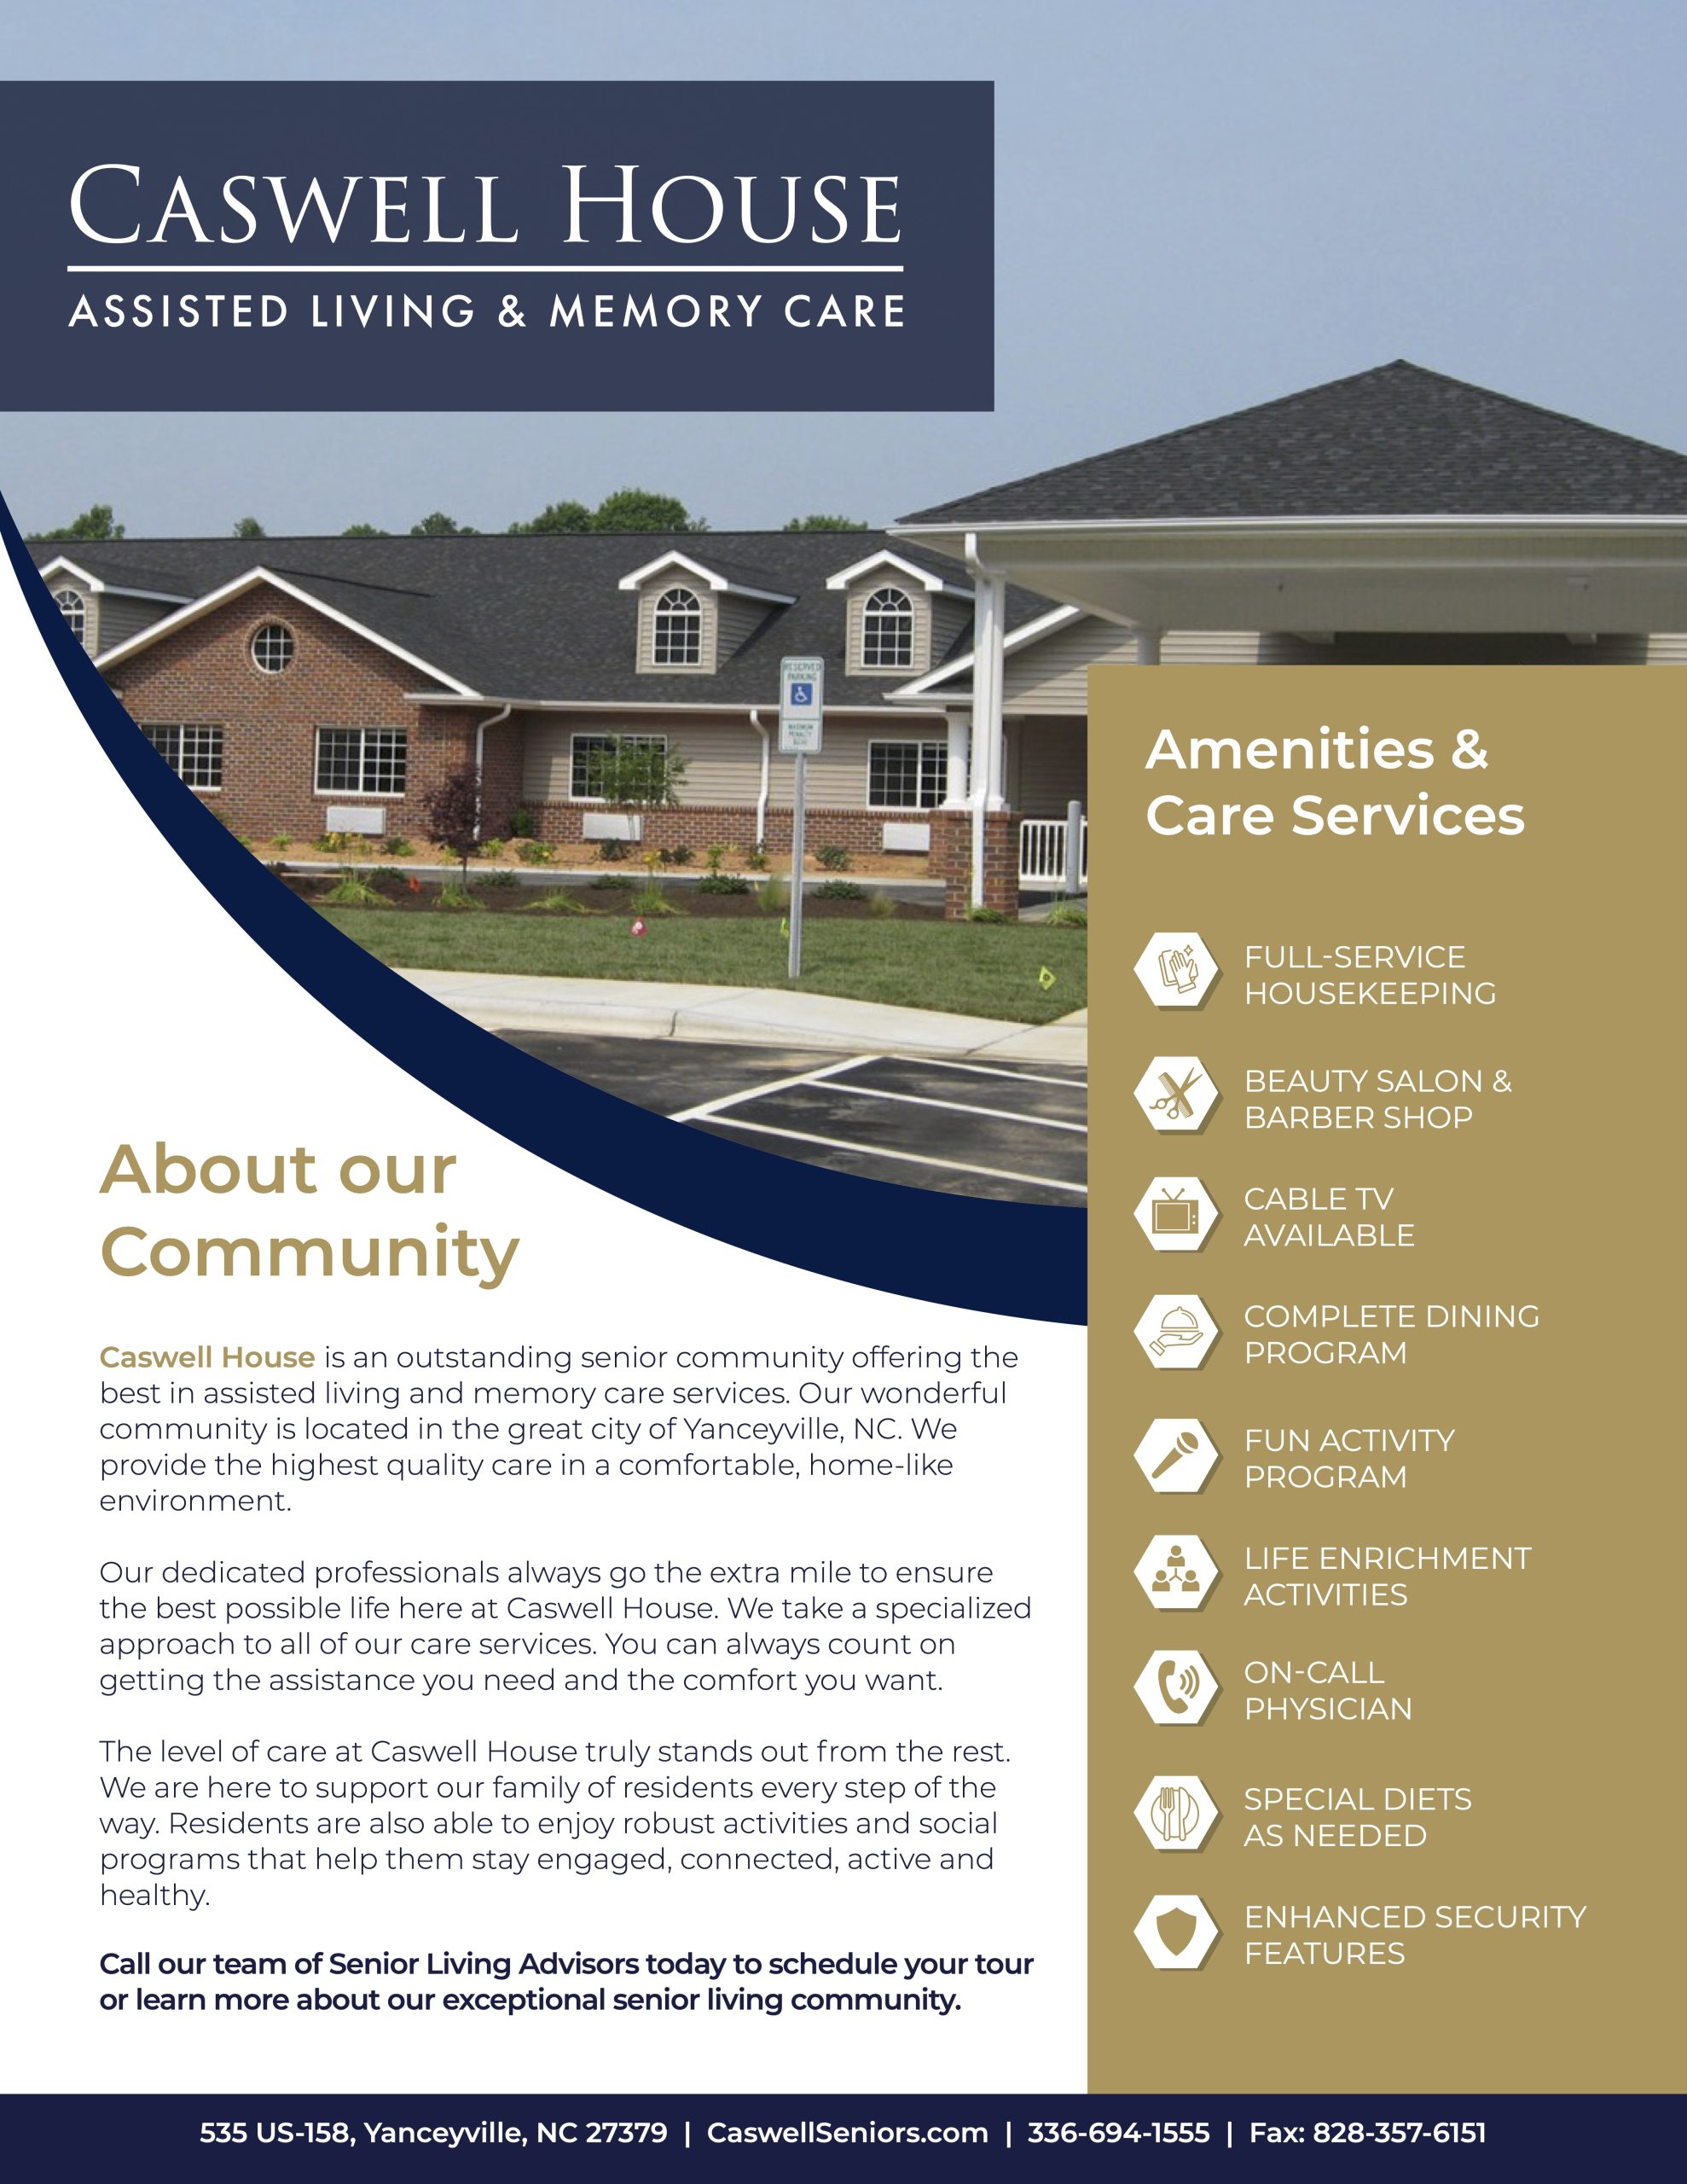 Caswell House - About our Services